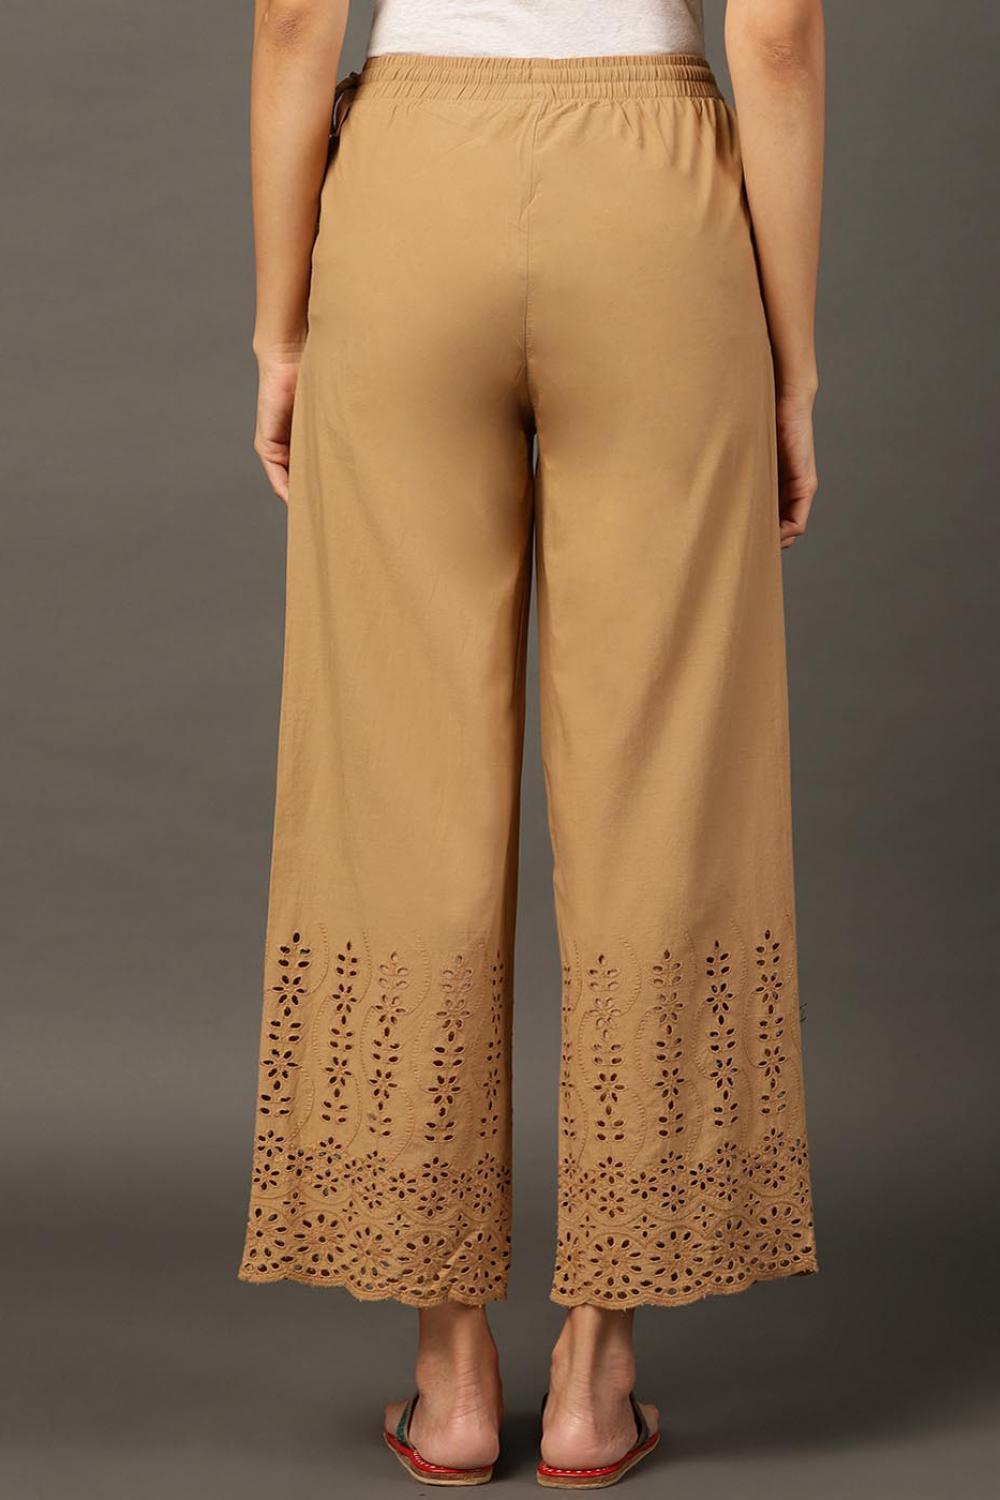 Beige Palazzos With Shimmery Details At The Hems - Lakshita